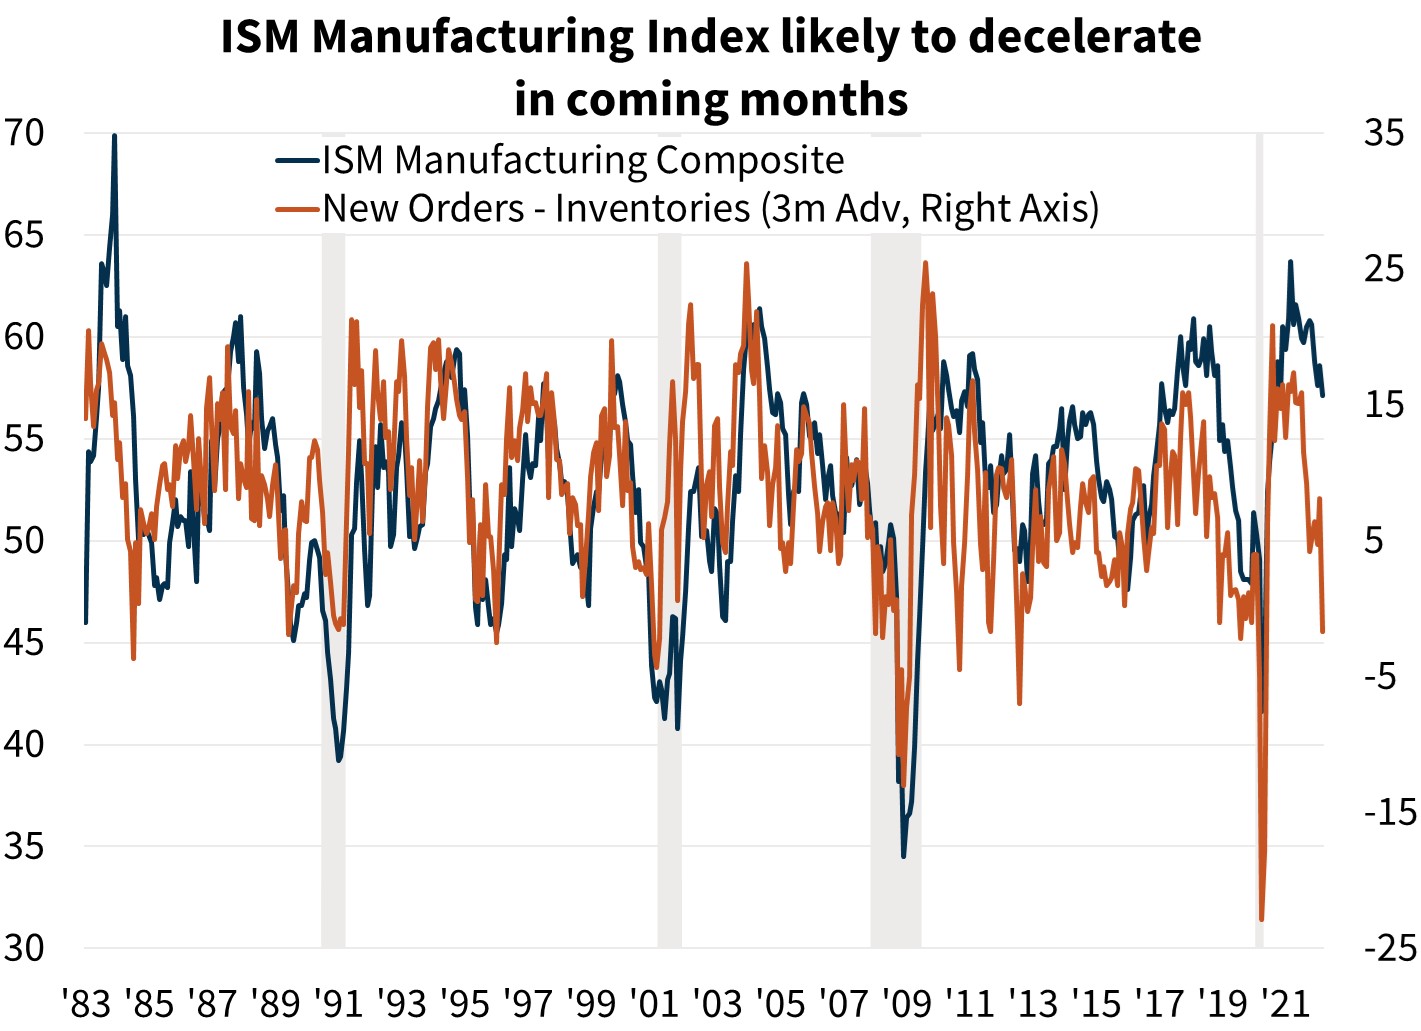  ISM Manufacturing Index likely to decelerate in coming months